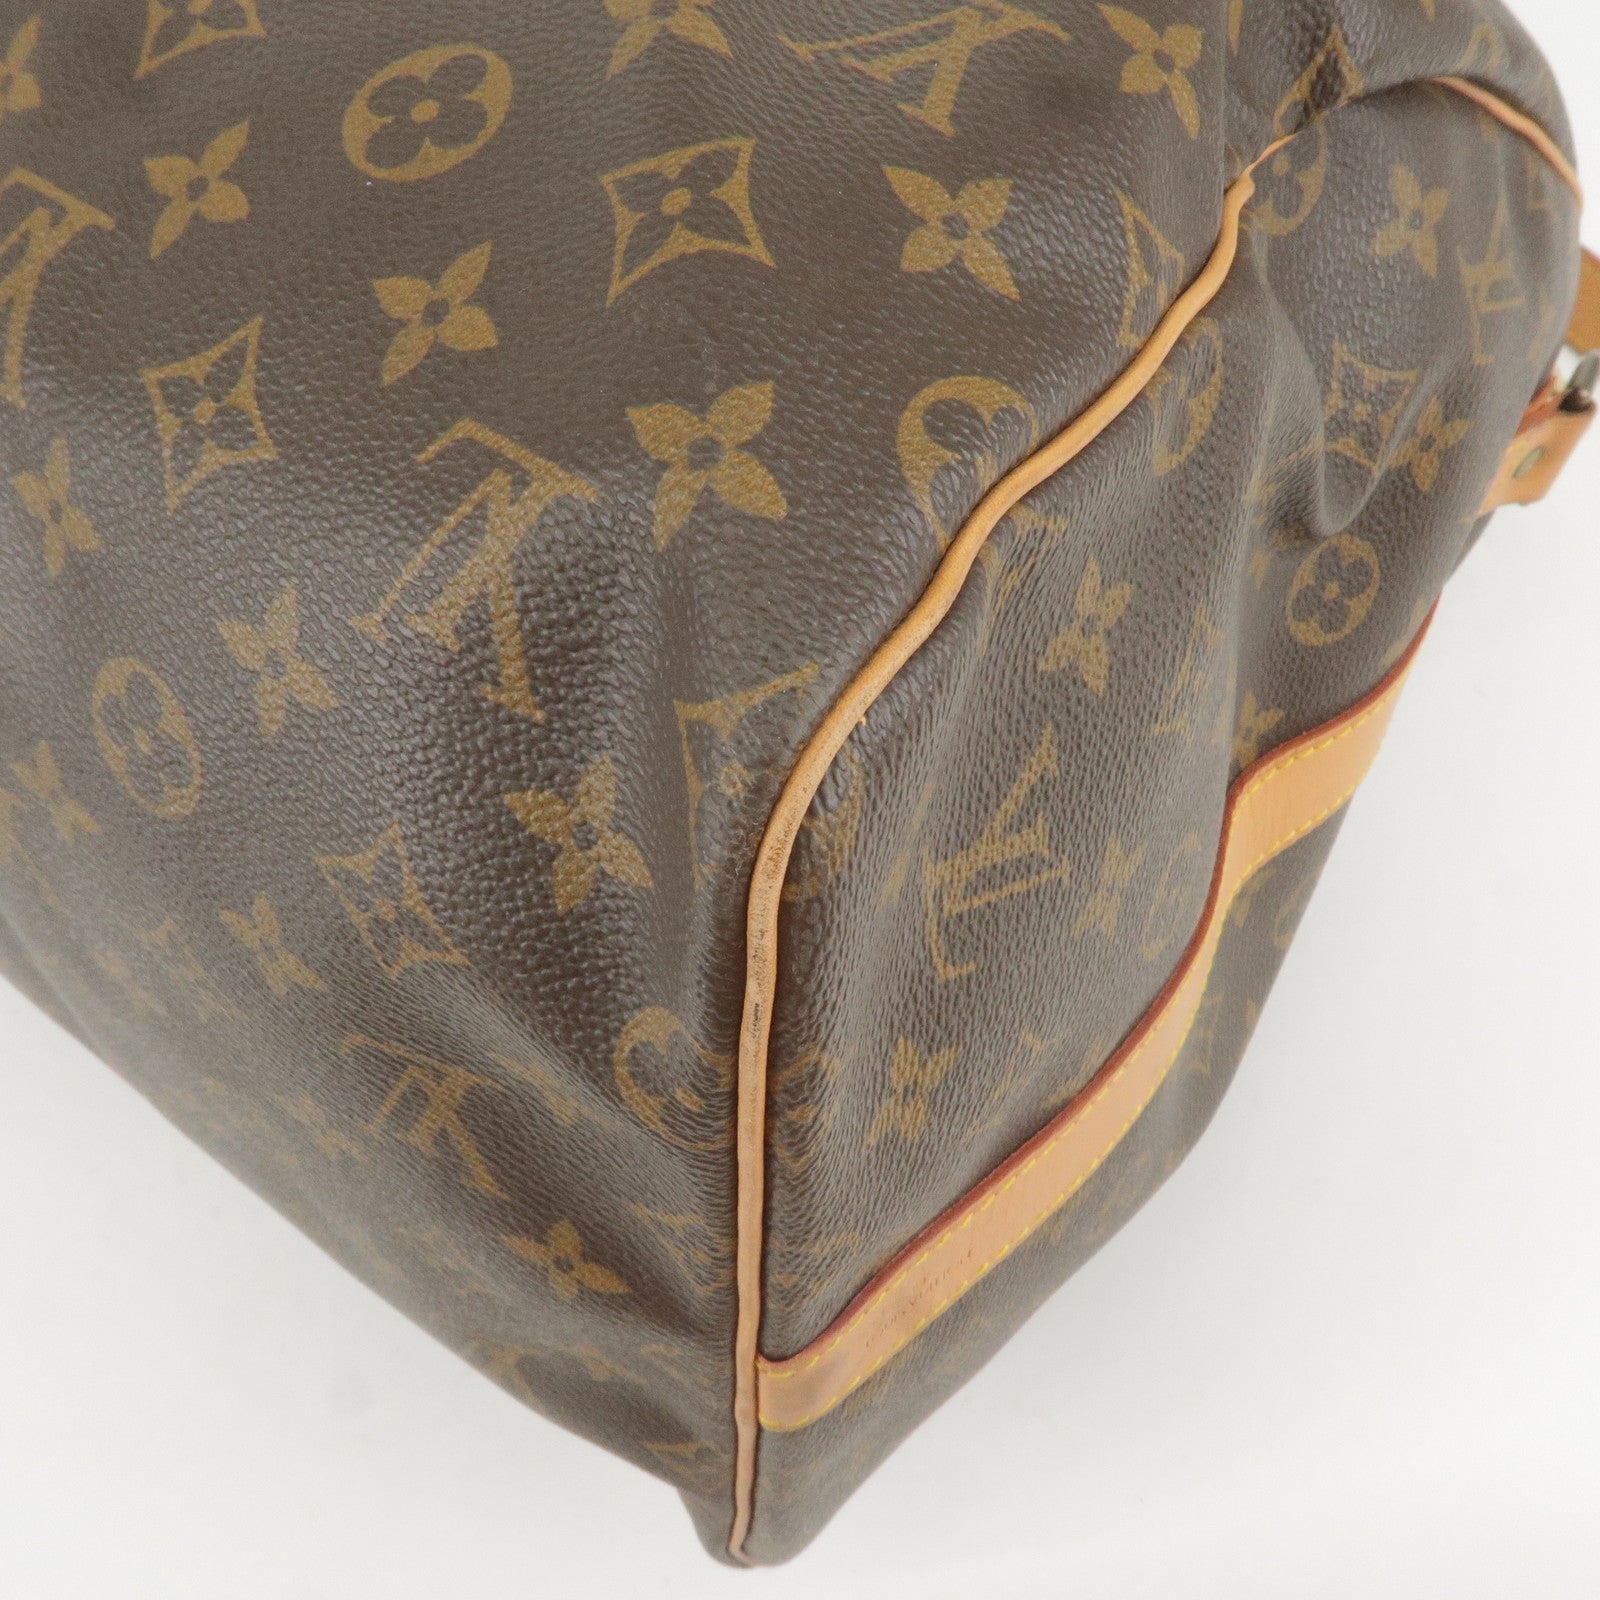 Louis Vuitton Monogram Partition M51901 Pouch Bag Free Shipping [Used]